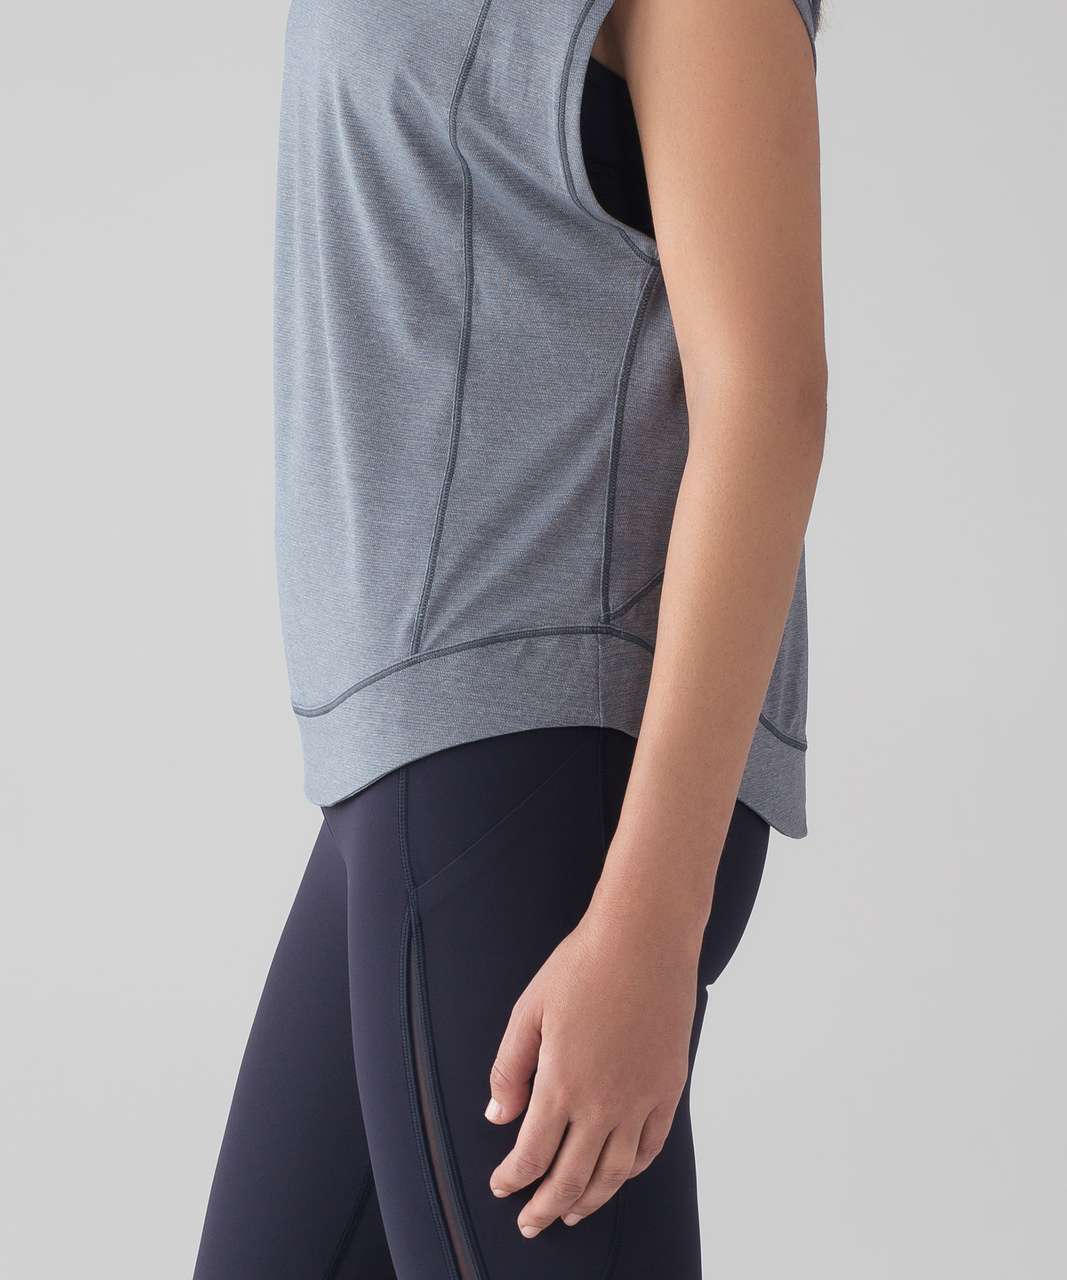 Lululemon Pace Perfect Short Sleeve - Heathered Sterling / Sterling